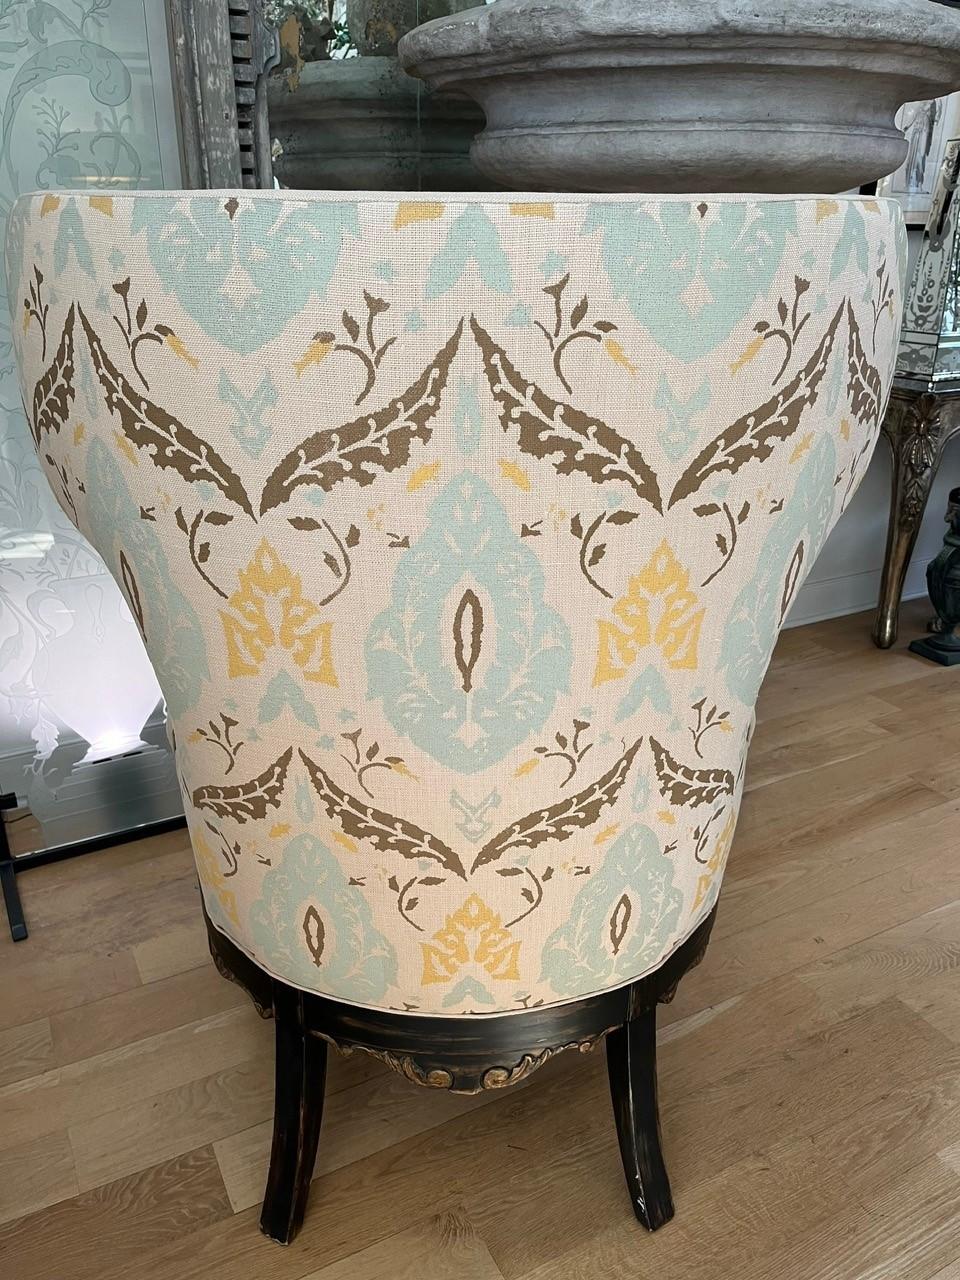 Made to Order Wing Back Swedish Chair with Ebonized Painted Finish with Gilt Accents, Upholstered in Linen Fabric, Tufted Back, Seat and Outside Back, Upholstery: this a Showroom Model
Customer Own Material